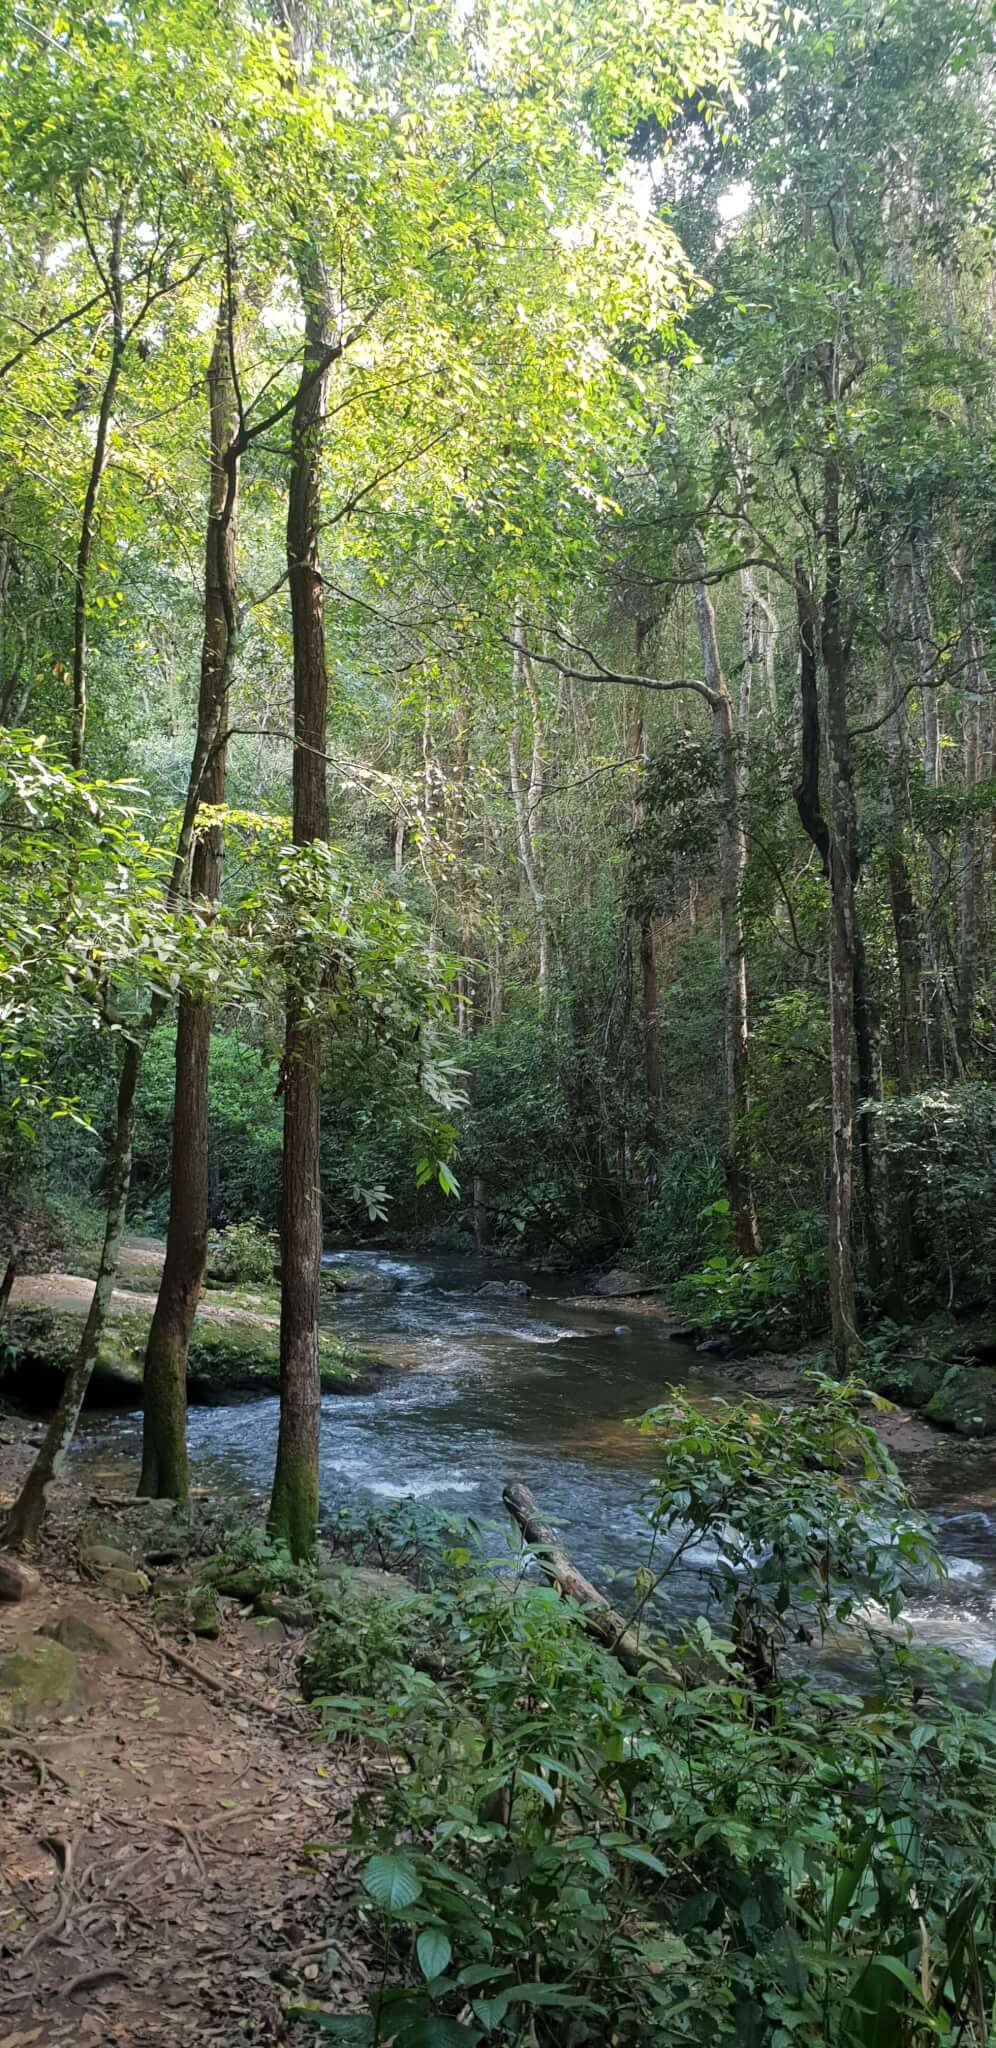 Trekking through the forest in the Pha Dok Siew nature trail